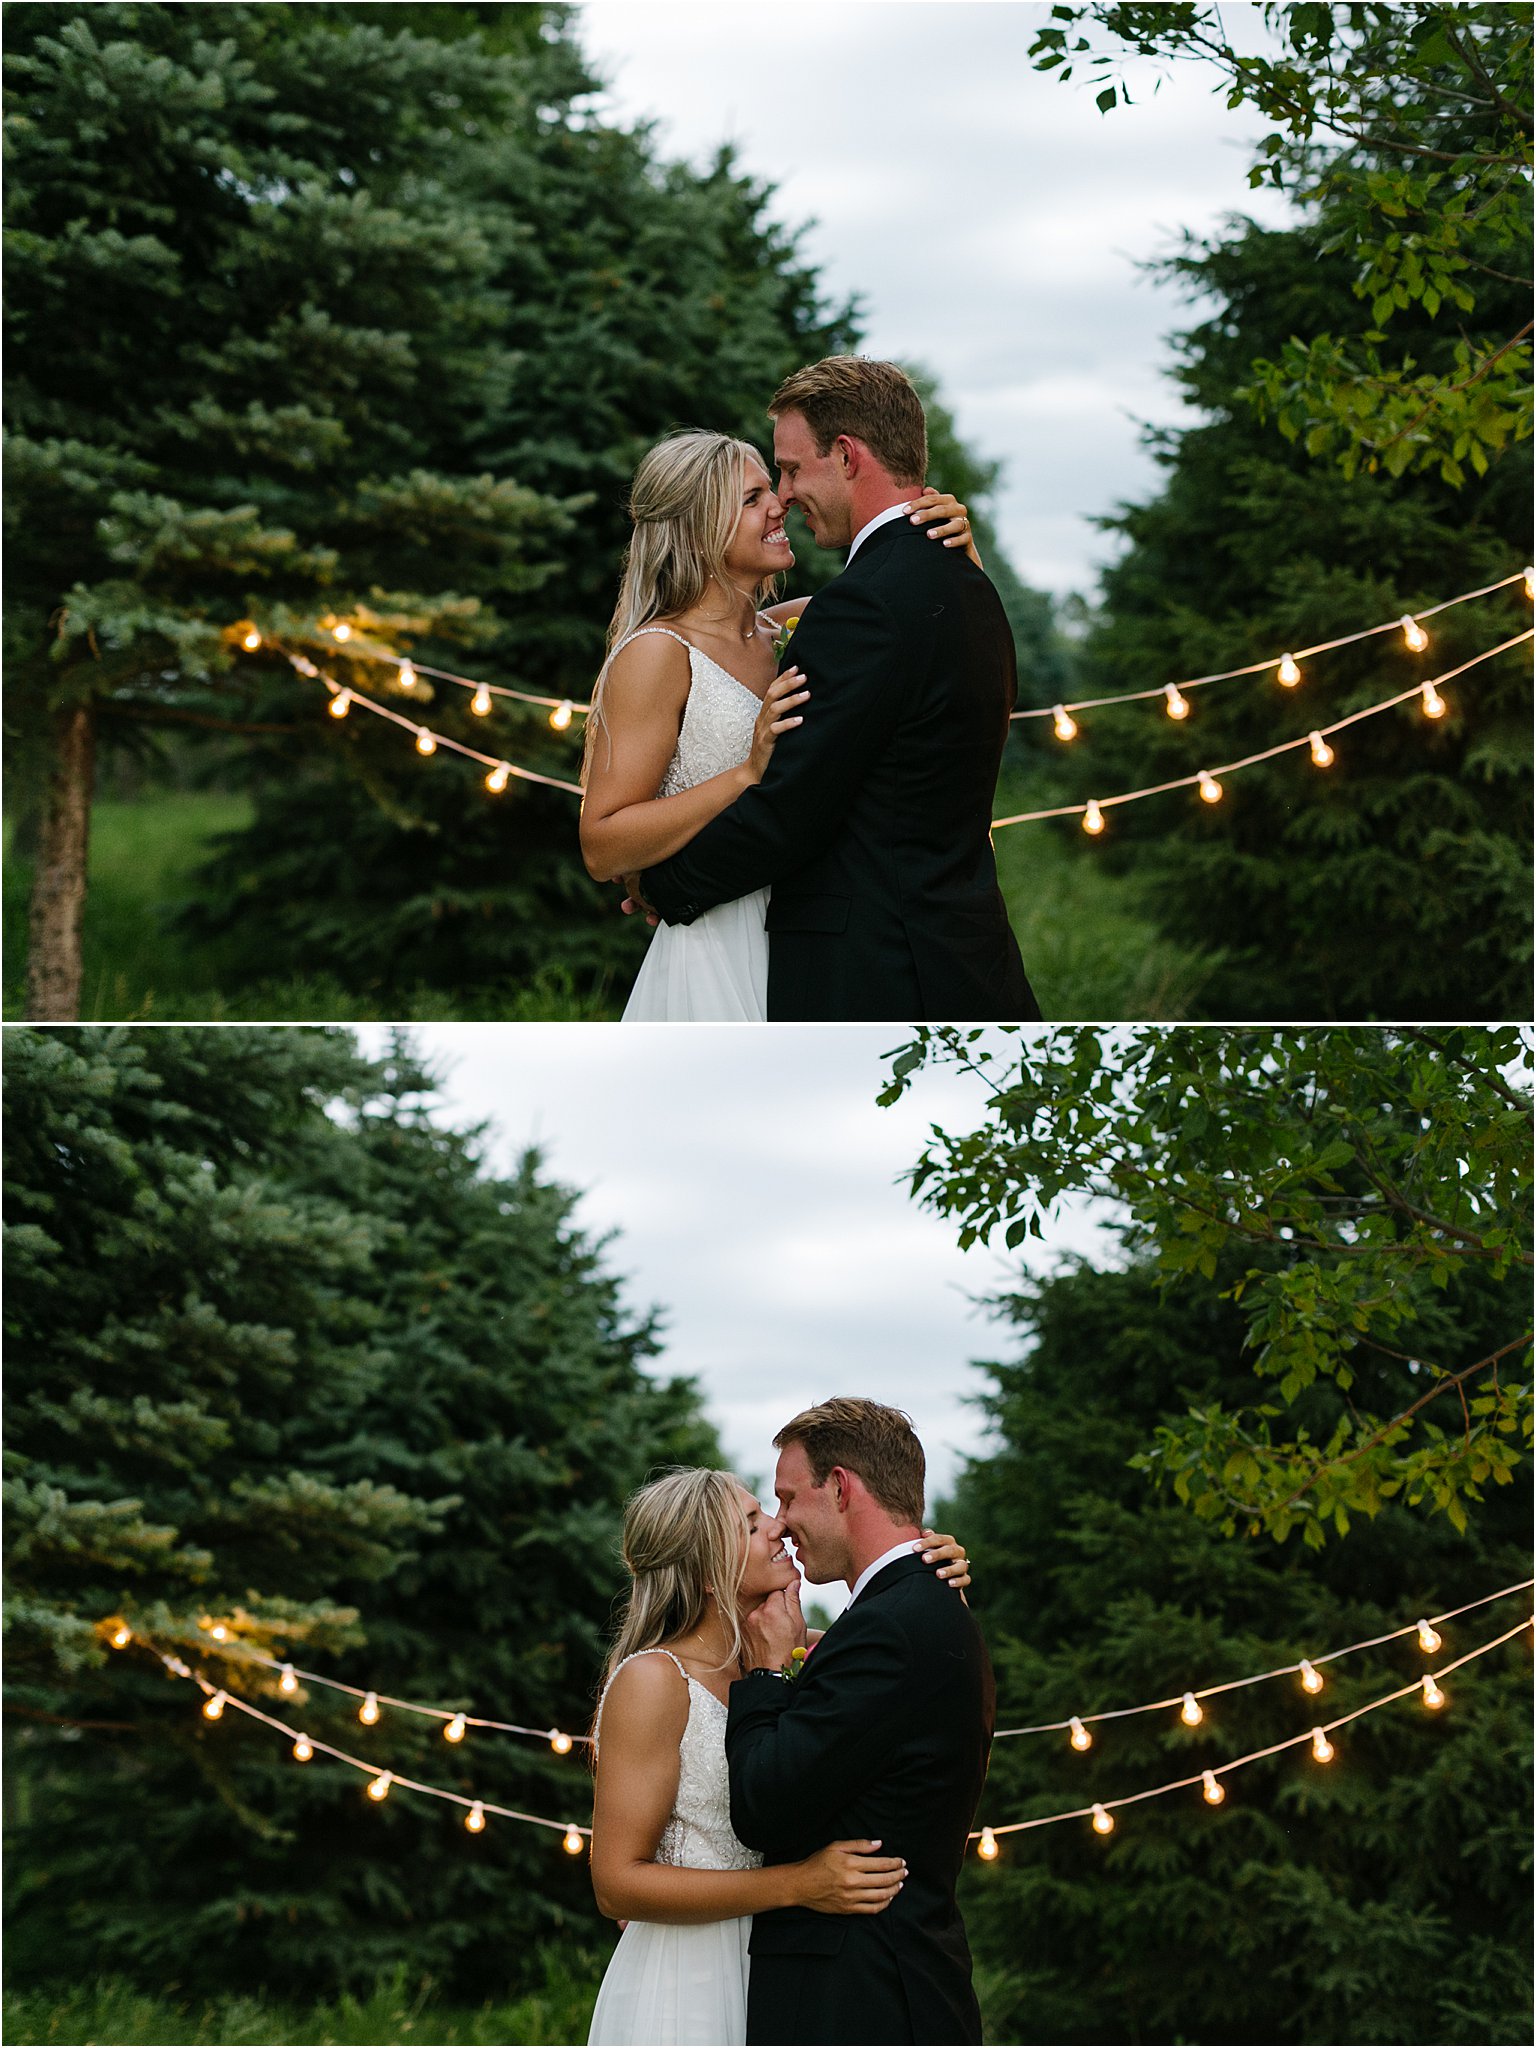 wedding couples first dance outside with lights